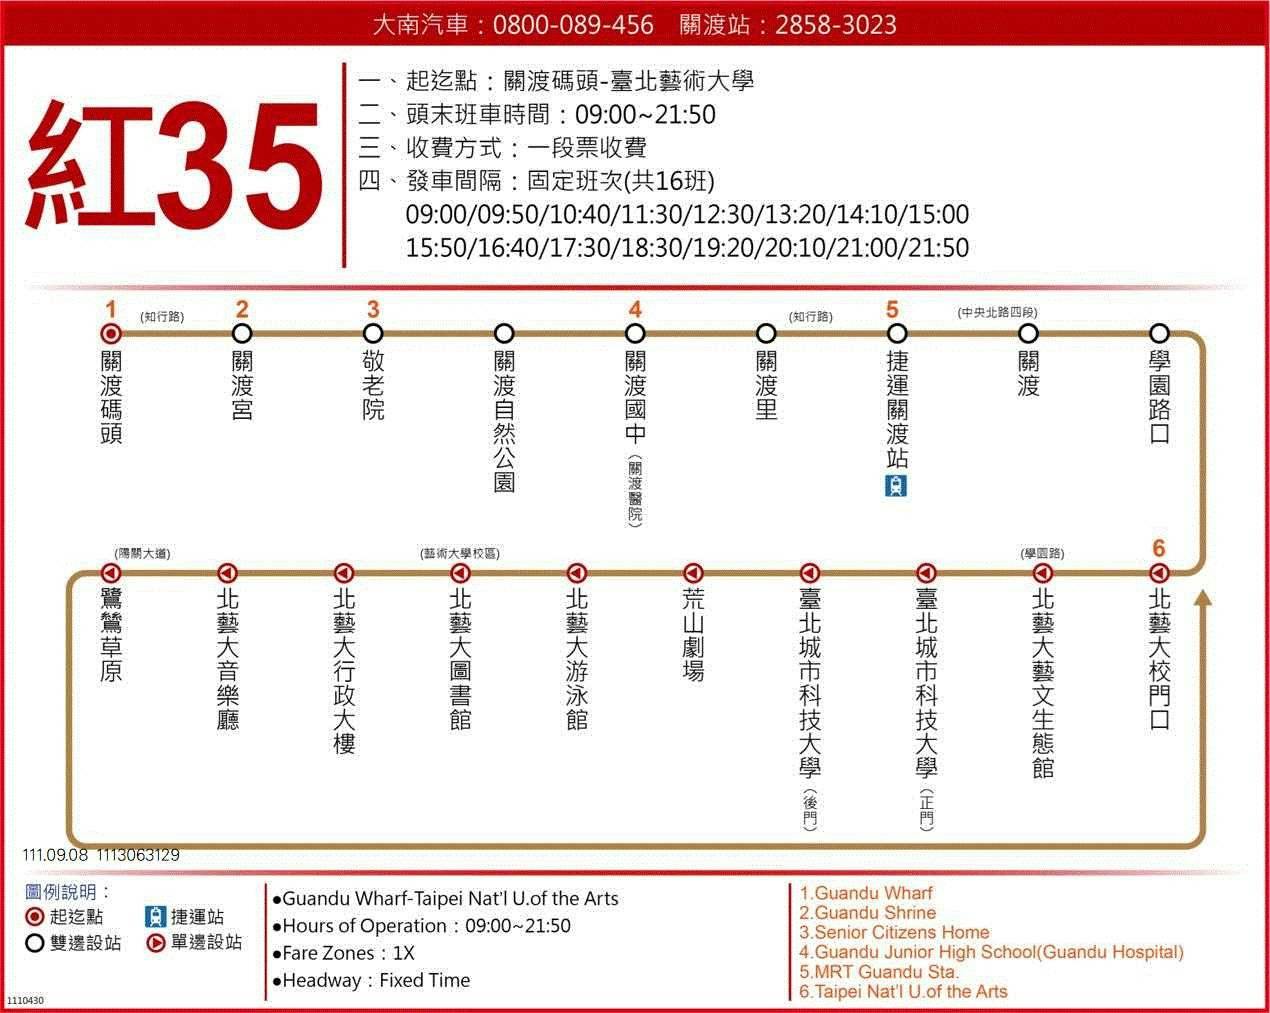 R35Route Map-台北市 Bus